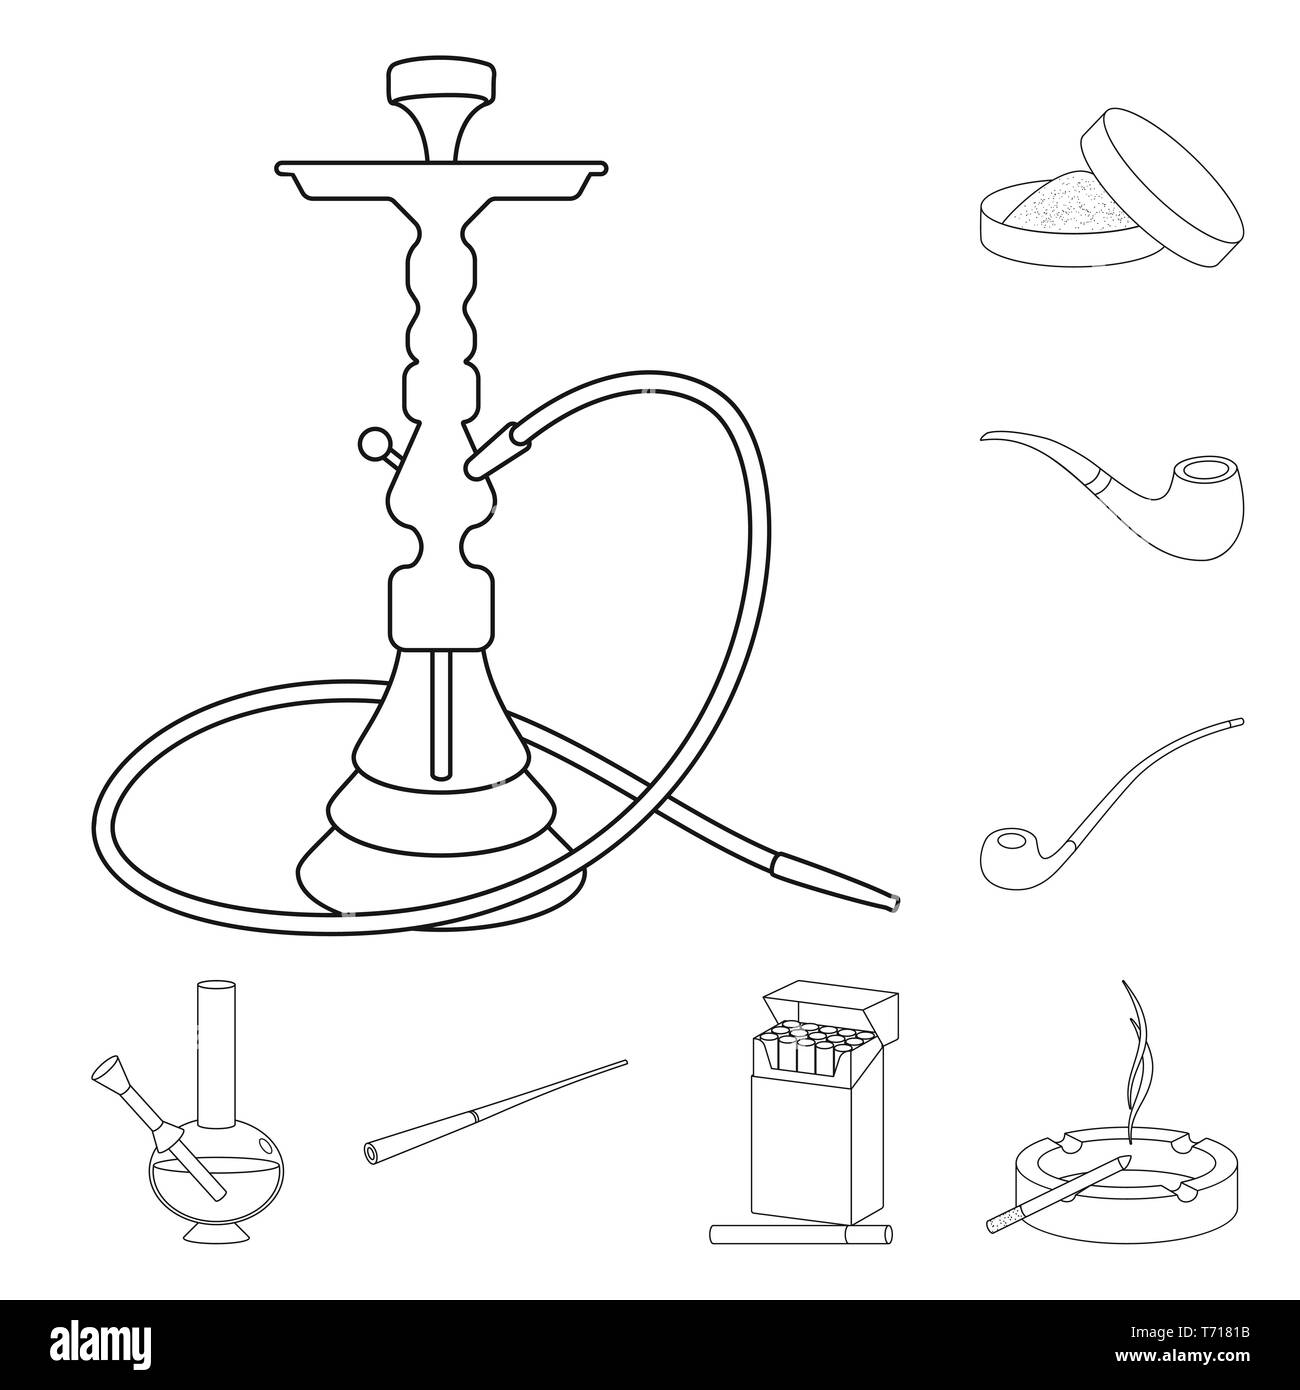 hookah,snuff,pipe,mouthpiece,pack,ashtray,shisha,delivery,retro,bong,holder,addiction,glass,arabic,round,wood,long,blank,plastic,aroma,smoking,tree,bad,filter,harm,container,classic,flask,health,nicotine,smoke,statistics,refuse,stop,anti,habit,cigarette,tobacco,set,vector,icon,illustration,isolated,collection,design,element,graphic,sign,outline,line Vector Vectors , Stock Vector